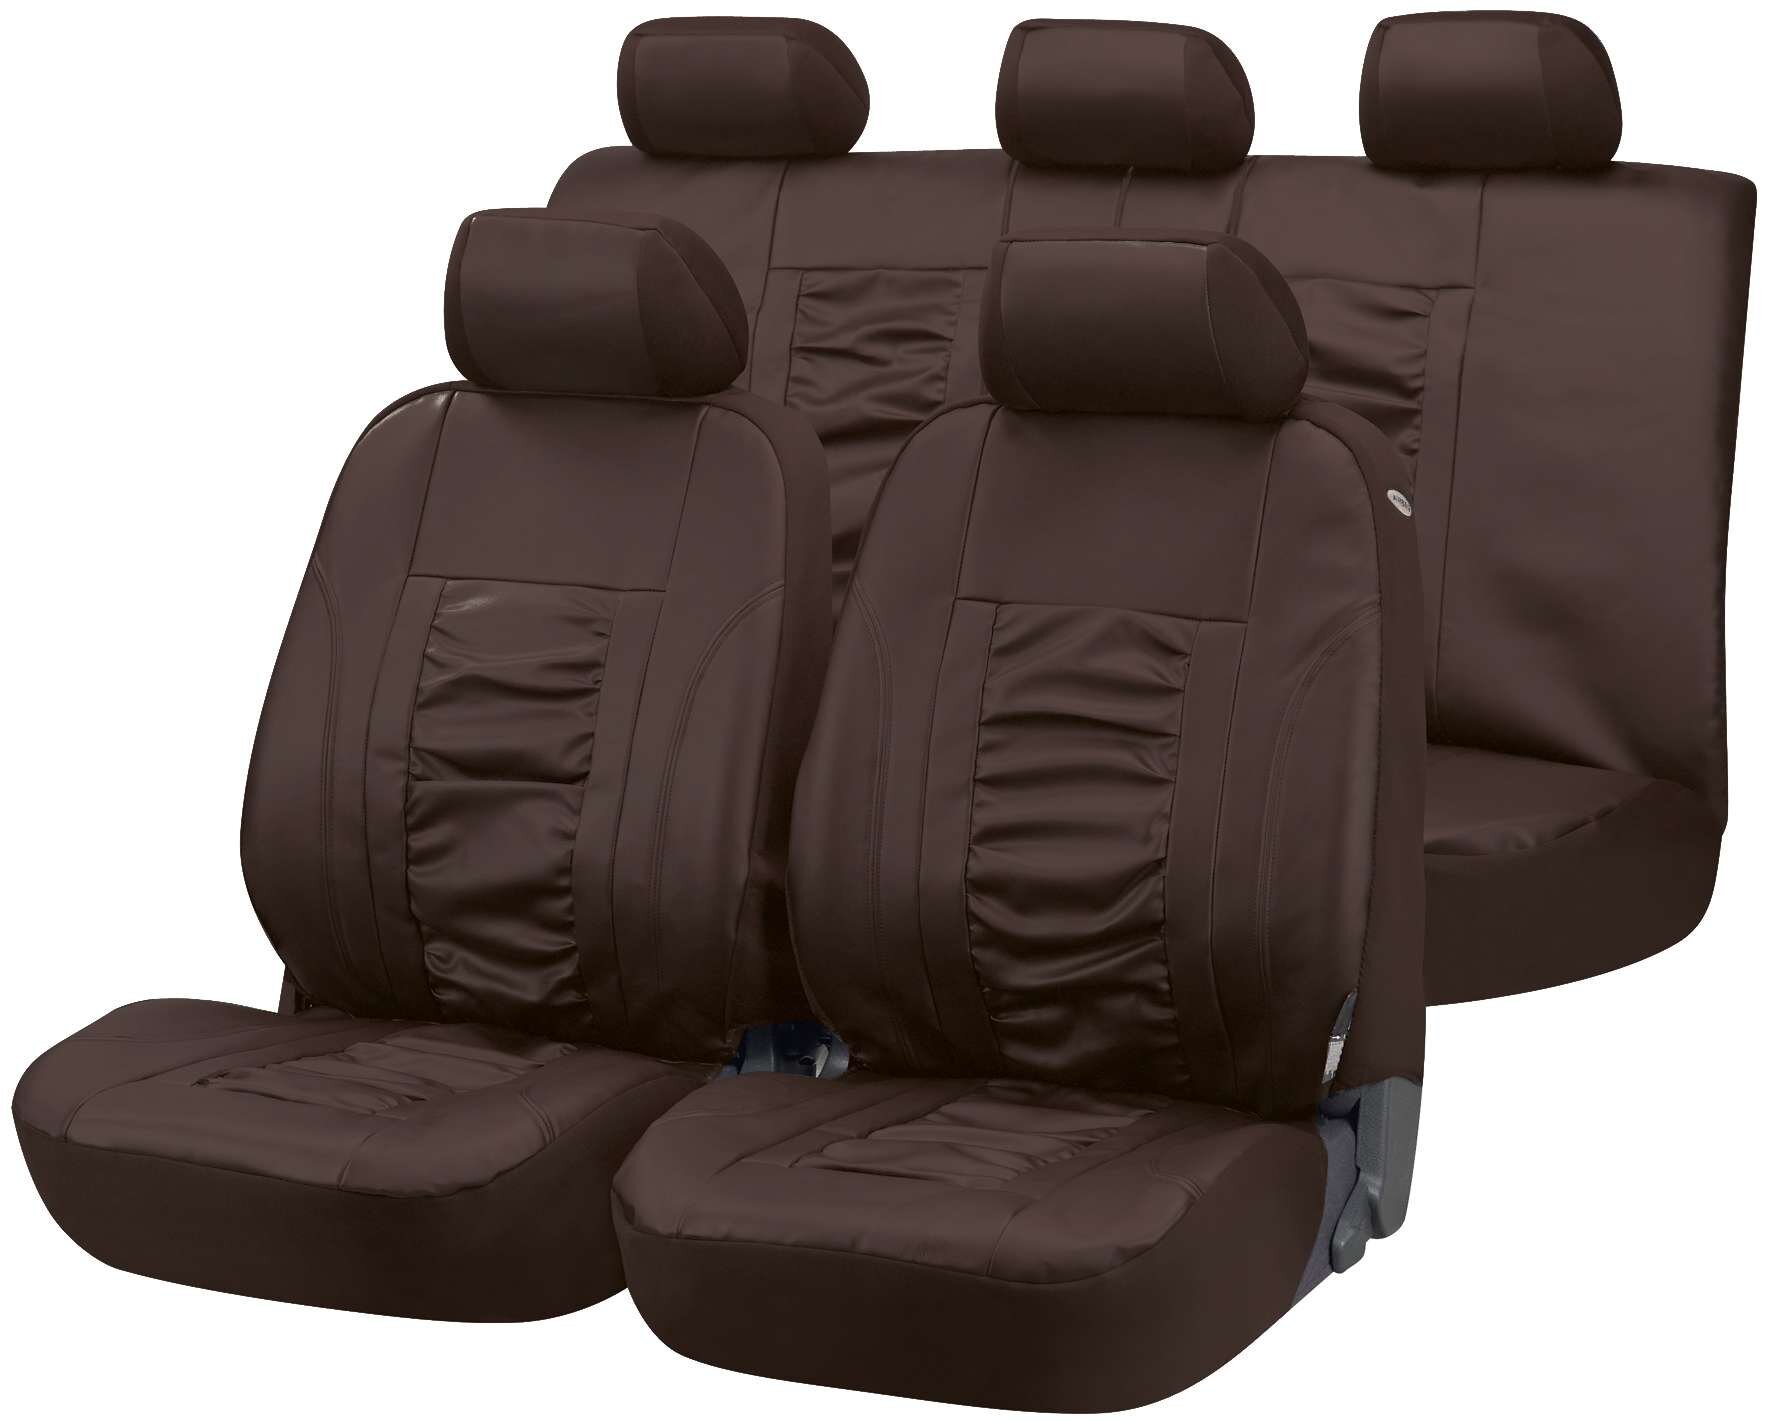 Car Seat cover Raphael brown imitation leather